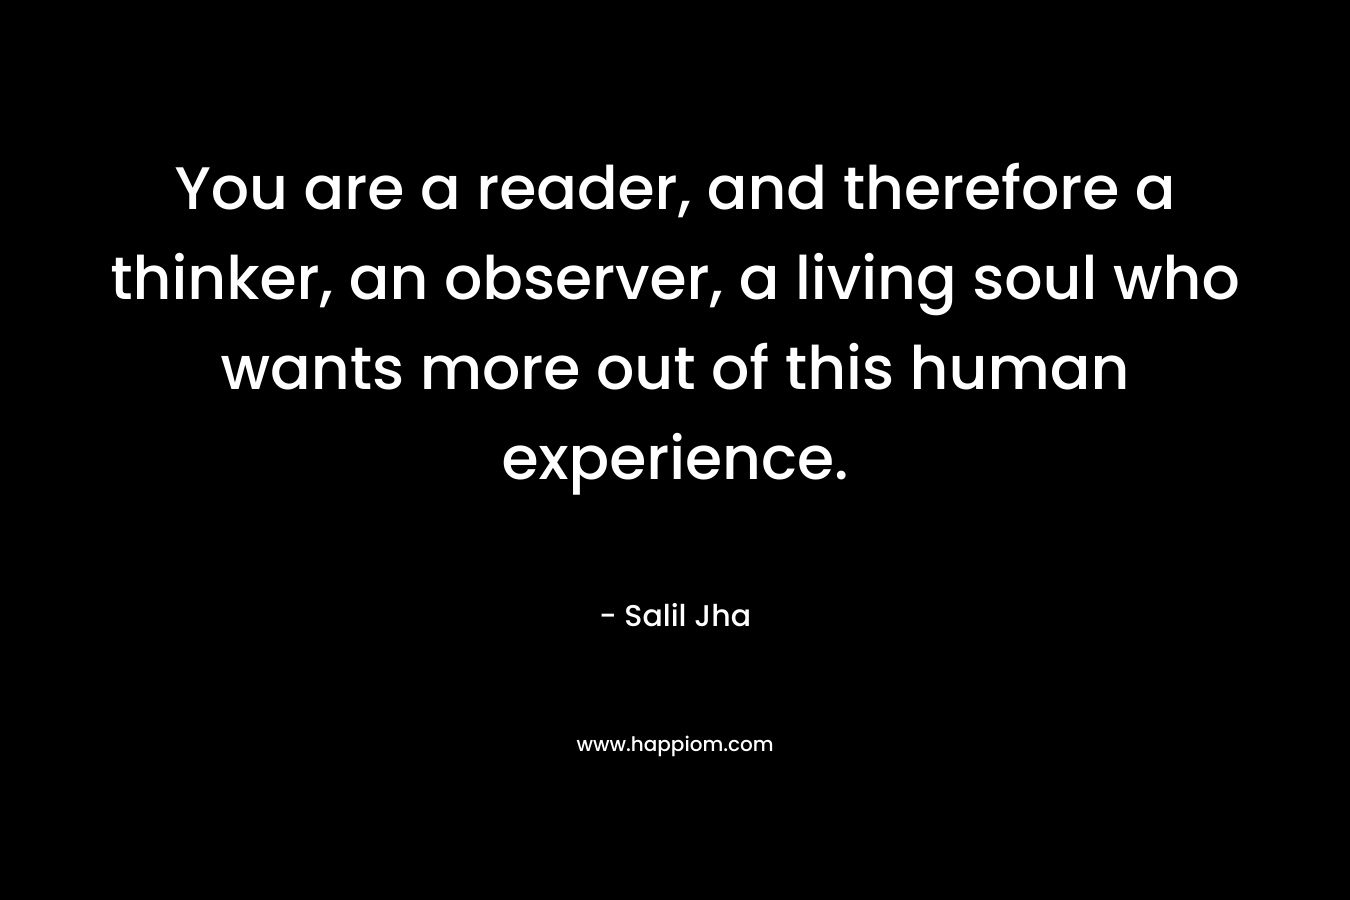 You are a reader, and therefore a thinker, an observer, a living soul who wants more out of this human experience.